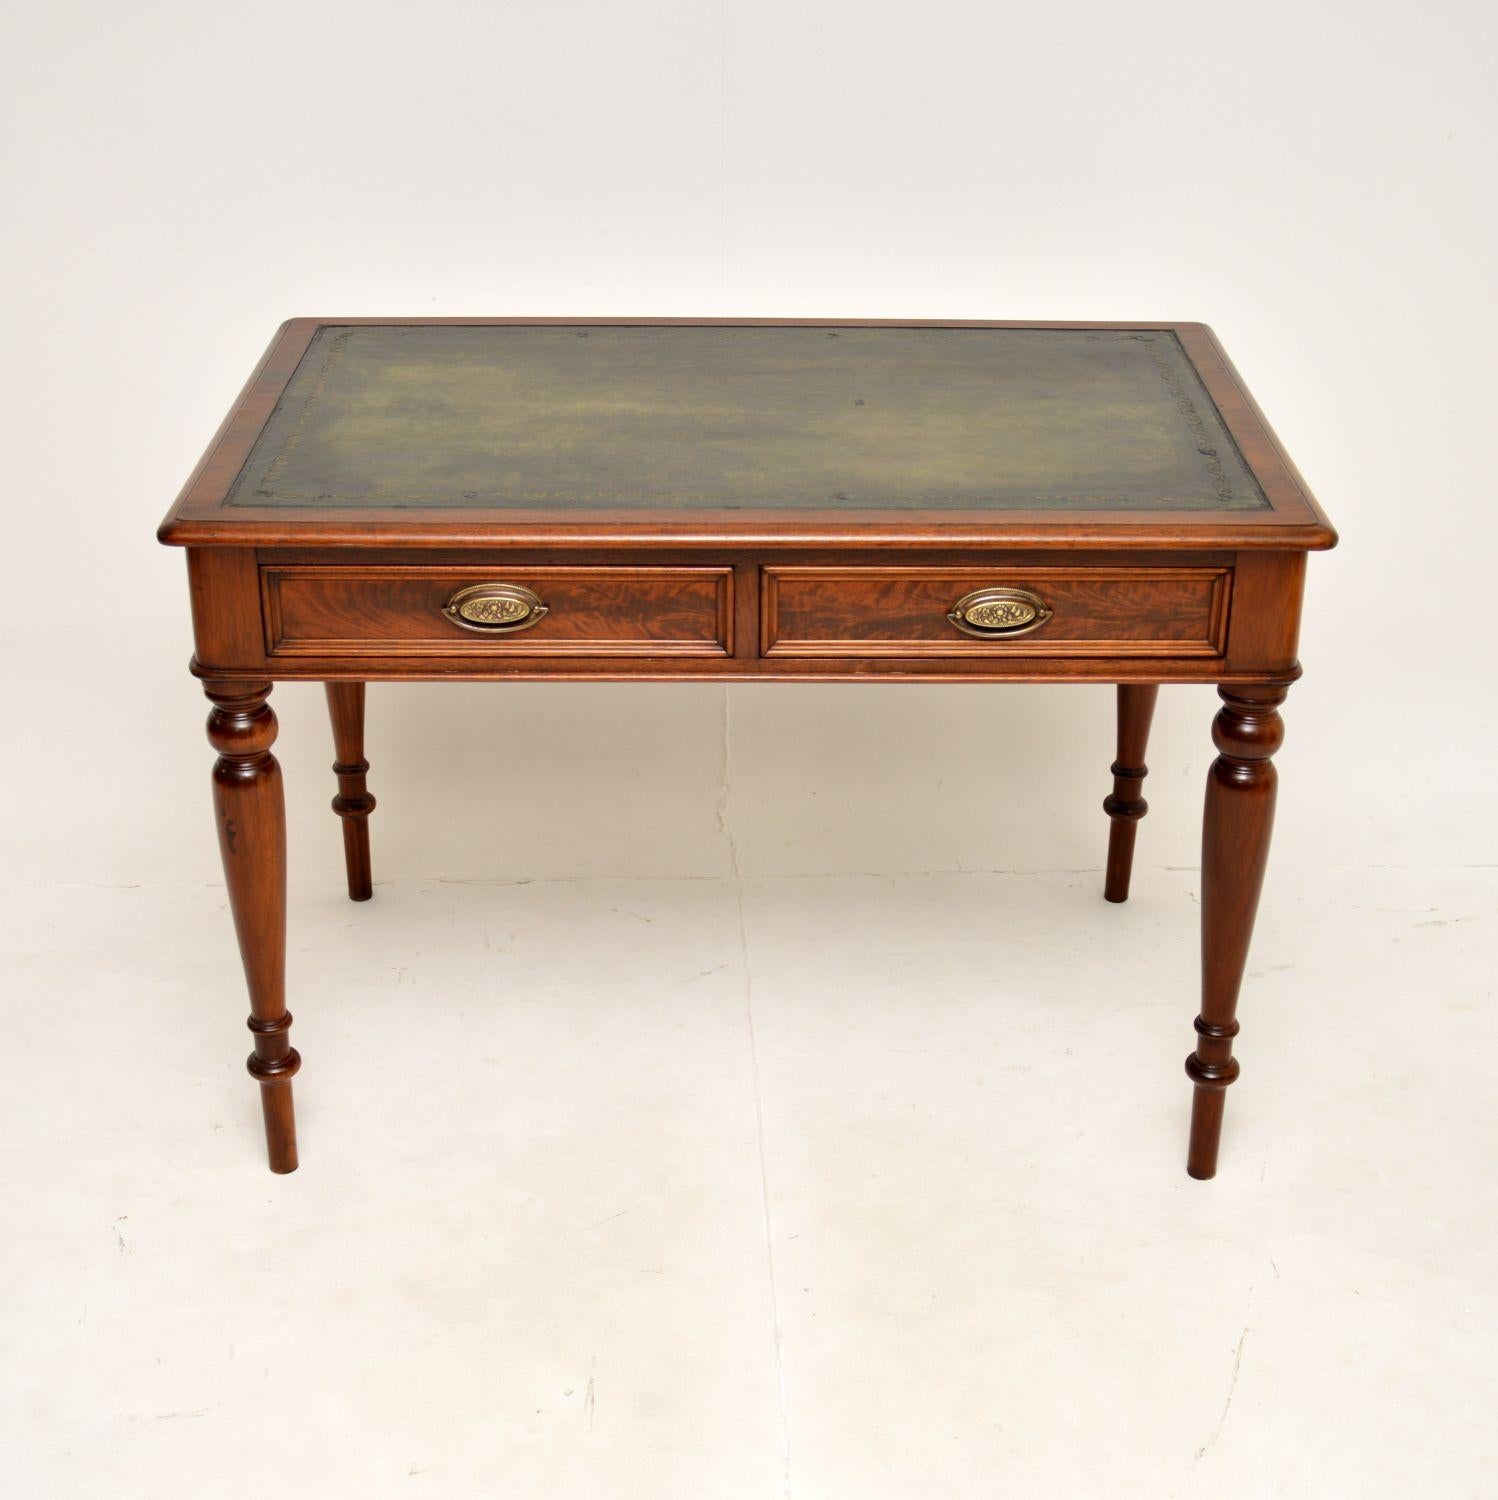 A very smart and extremely well made antique Victorian writing table / desk. This was made in England, it dates from around the 1860-1880 period.

The quality is outstanding, this is a very useful size and looks amazing from all angles. The back is